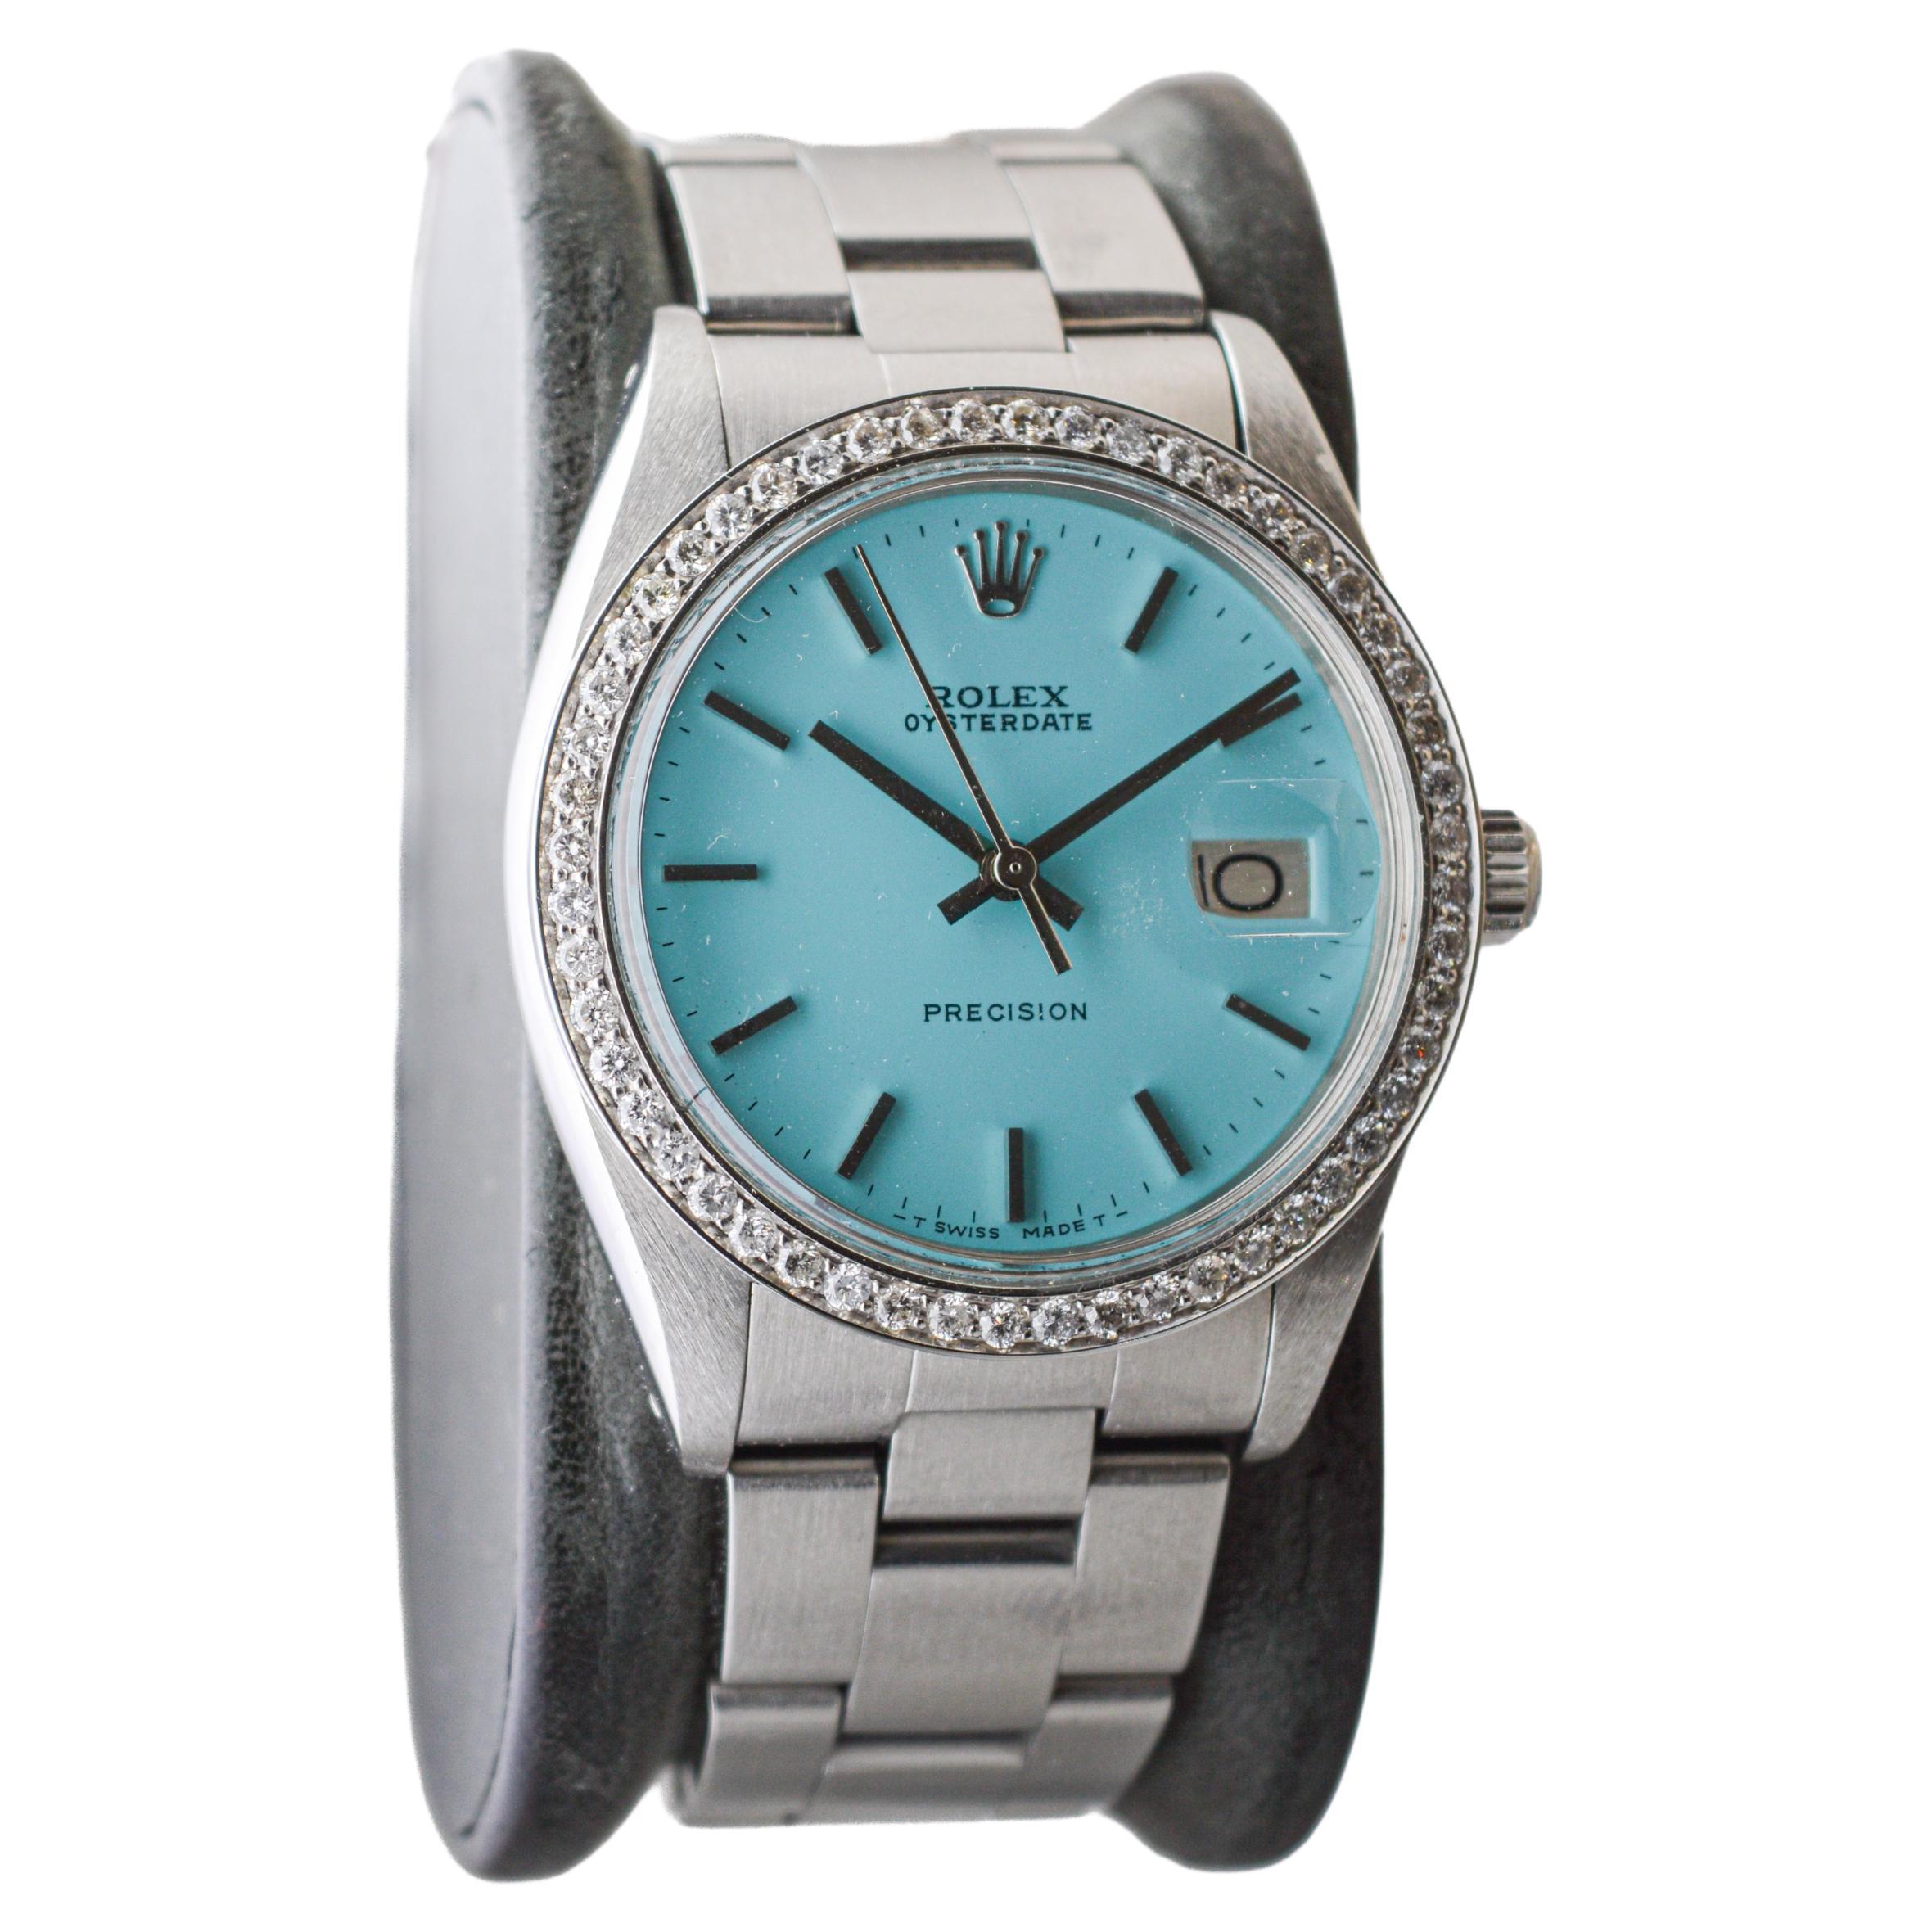 FACTORY / HOUSE: Rolex Watch Company
STYLE / REFERENCE: Oysterdate / Reference 6694
METAL / MATERIAL: Stainless Steel
CIRCA / YEAR: 1970's
DIMENSIONS / SIZE: Length 43mm X Diameter 35mm
MOVEMENT / CALIBER: Manual Winding / 17 Jewels
DIAL / HANDS: